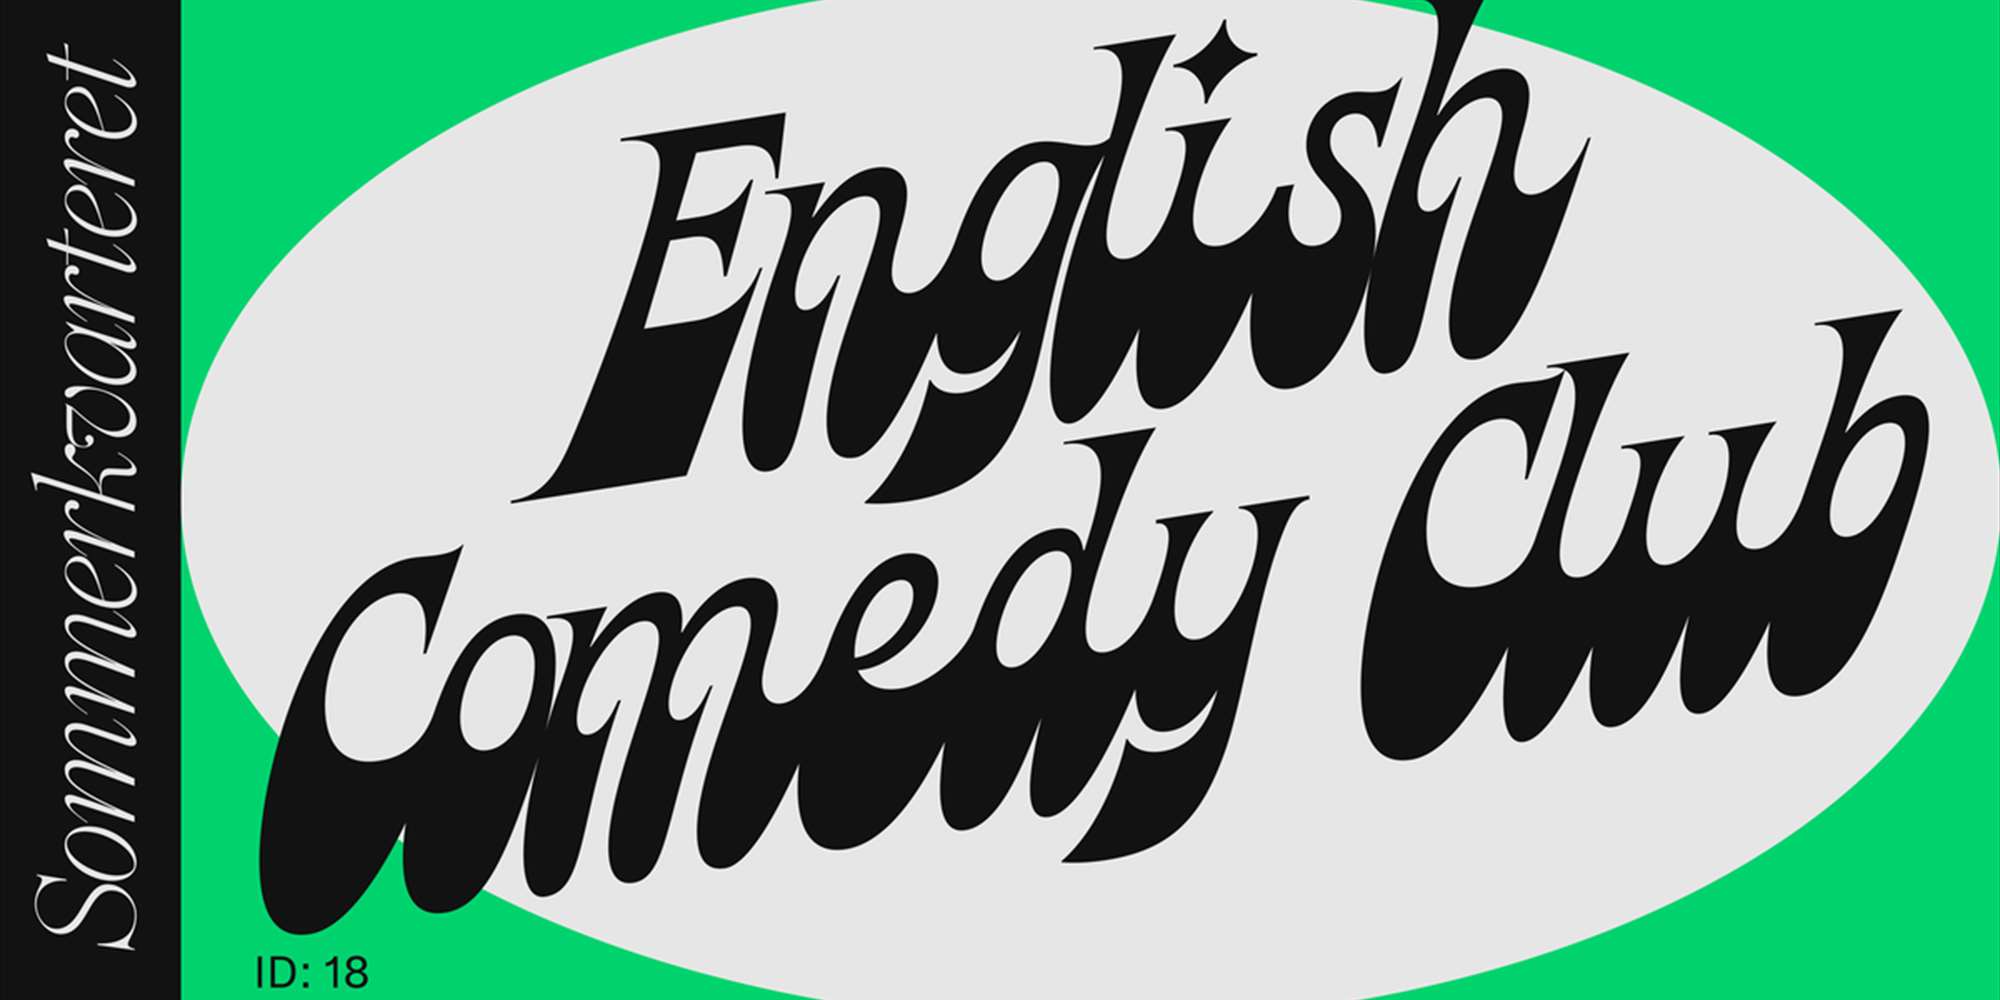 Stand up English Comedy Club